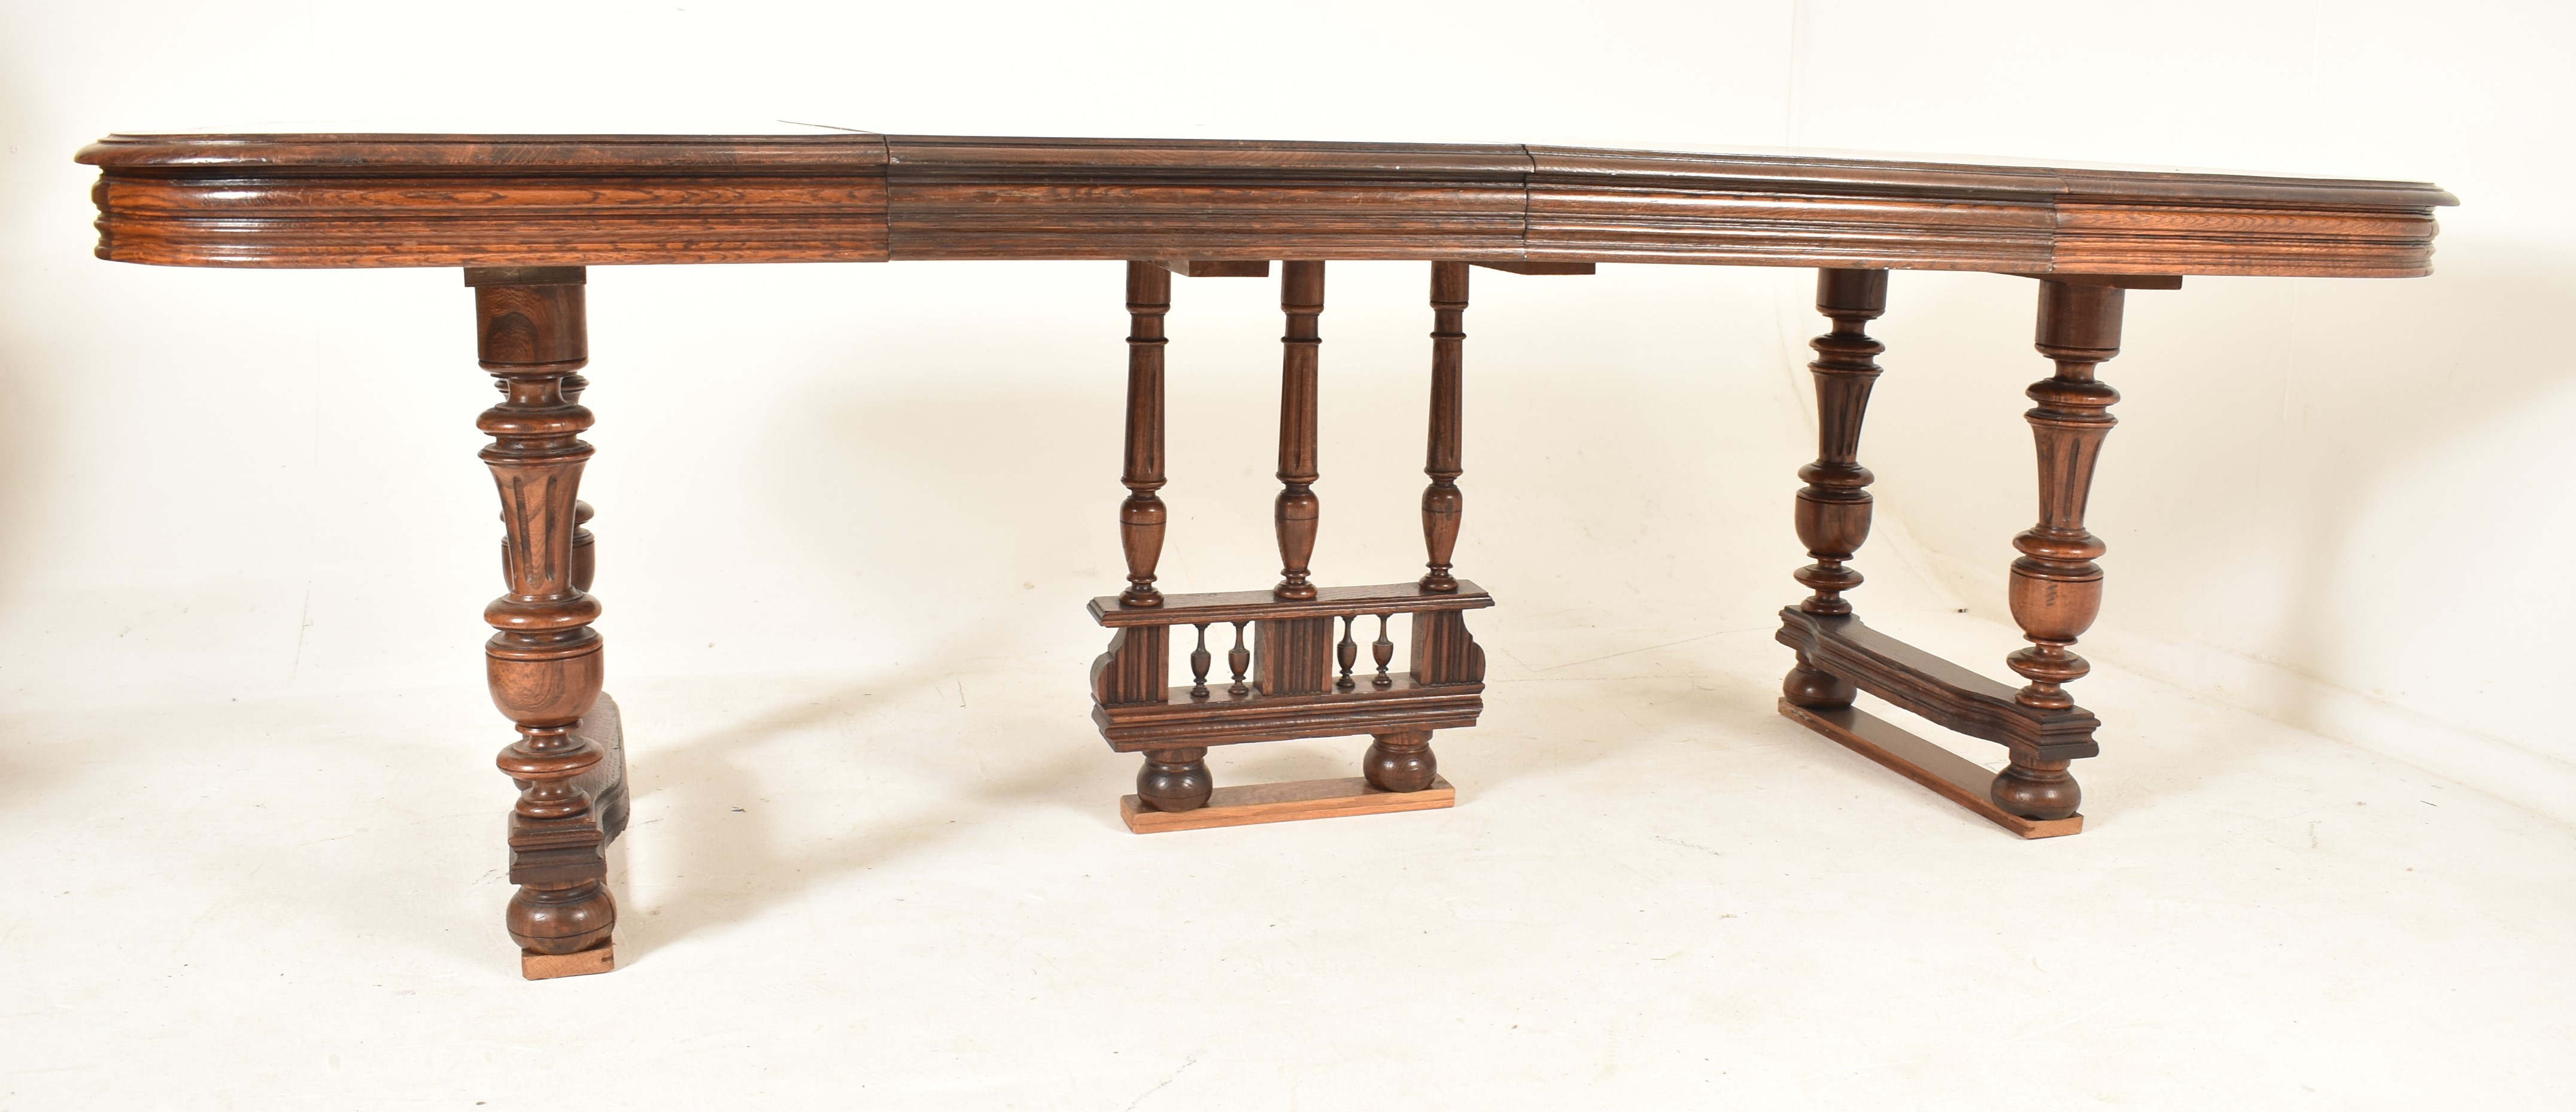 LATE 19TH CENTURY FRENCH OAK DRAW-LEAF DINING TABLE - Image 2 of 5